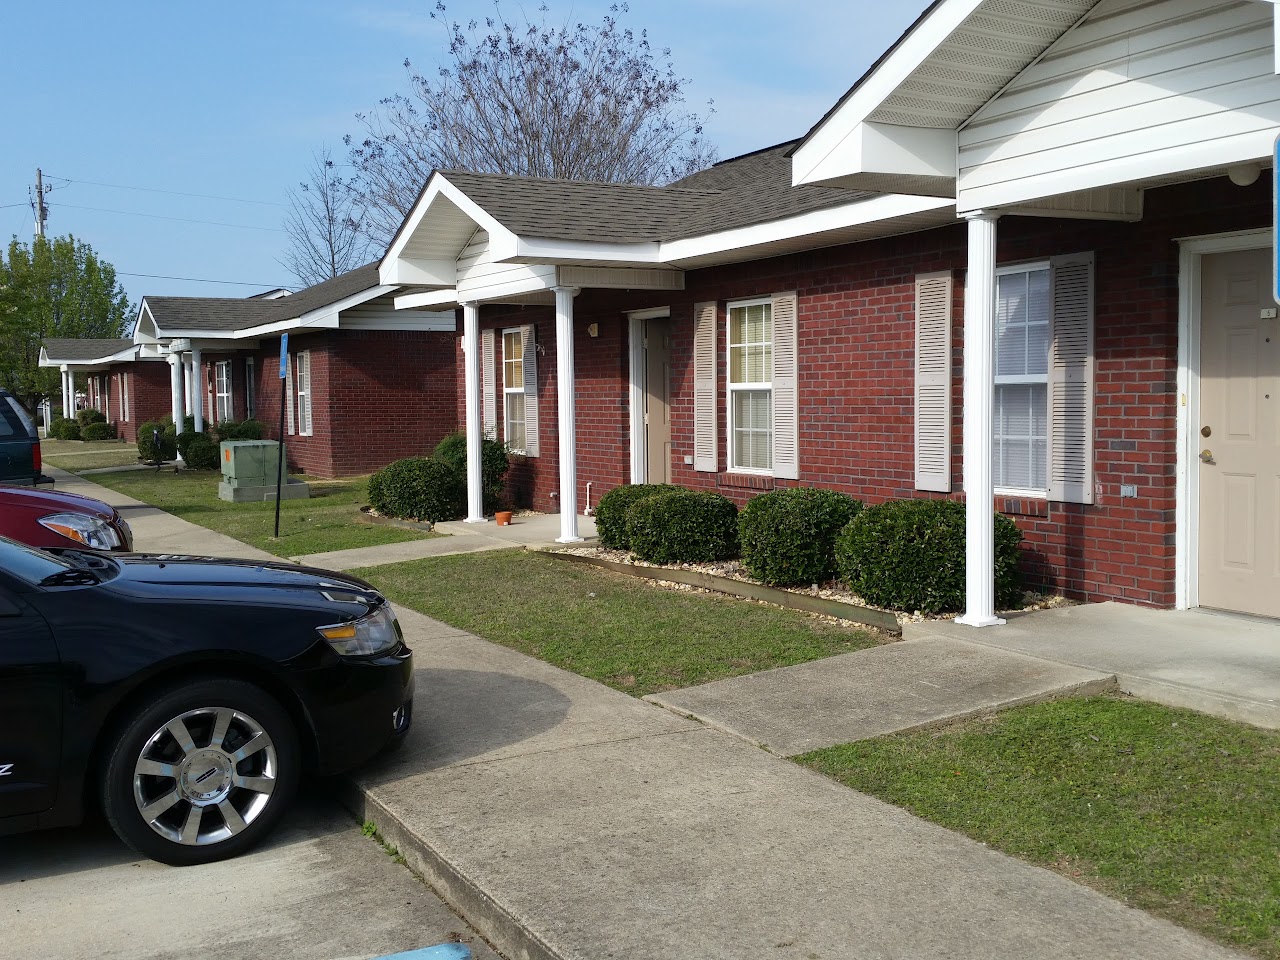 Photo of COTTONWOOD APTS. Affordable housing located at 209 SOUTHWIND DR ATHENS, AL 35611